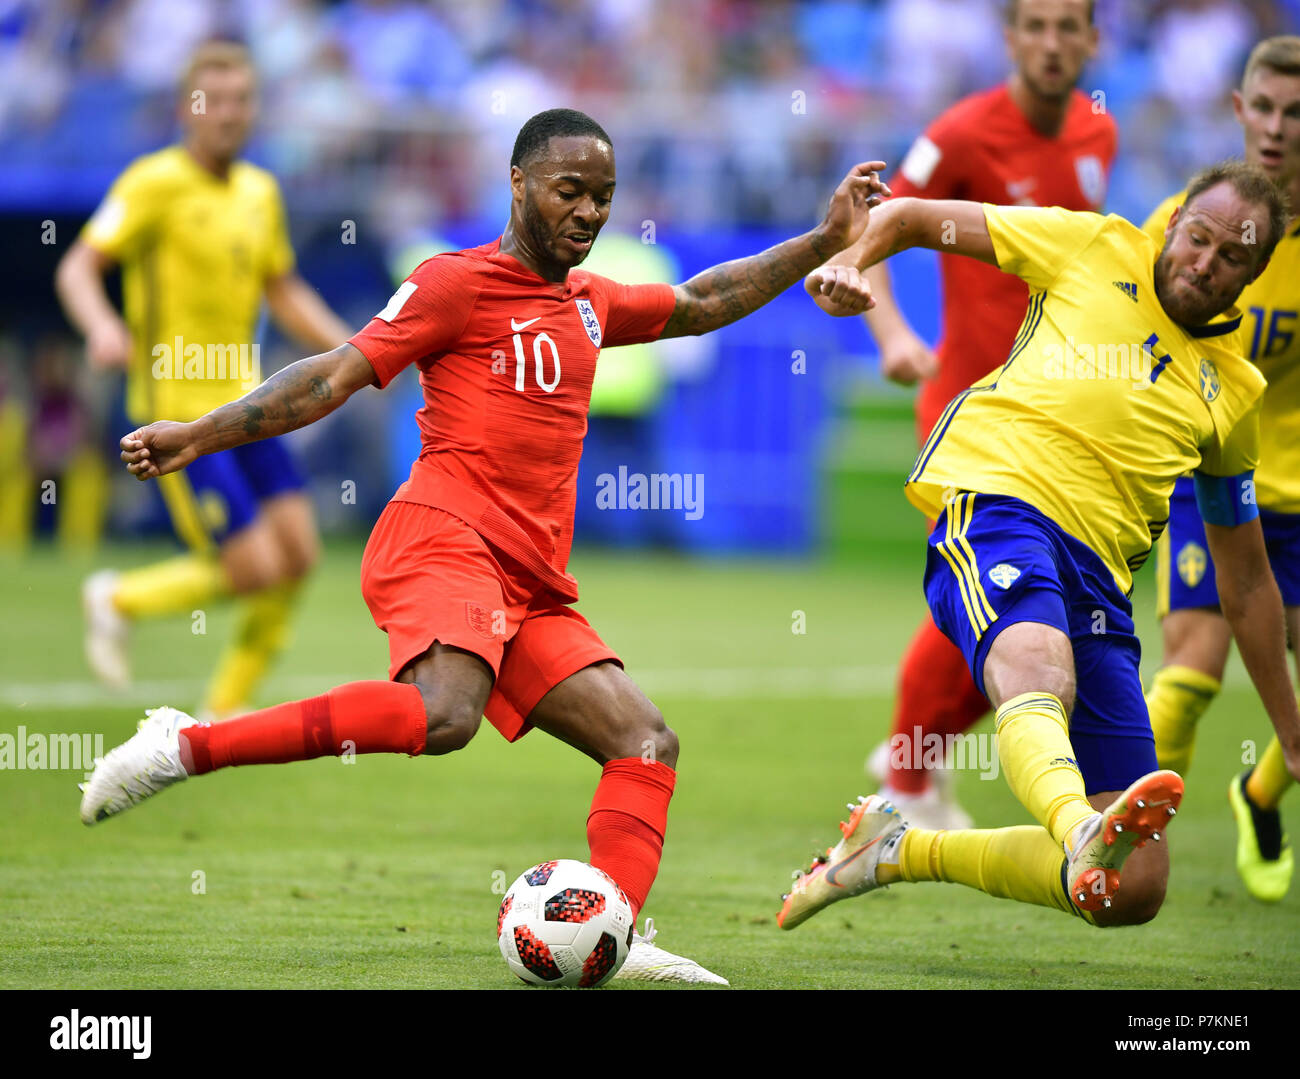 Samara, Russia. 7th July, 2018. Raheem Sterling (L) of England shoots during the 2018 FIFA World Cup quarter-final match between Sweden and England in Samara, Russia, July 7, 2018. Credit: Chen Yichen/Xinhua/Alamy Live News Stock Photo